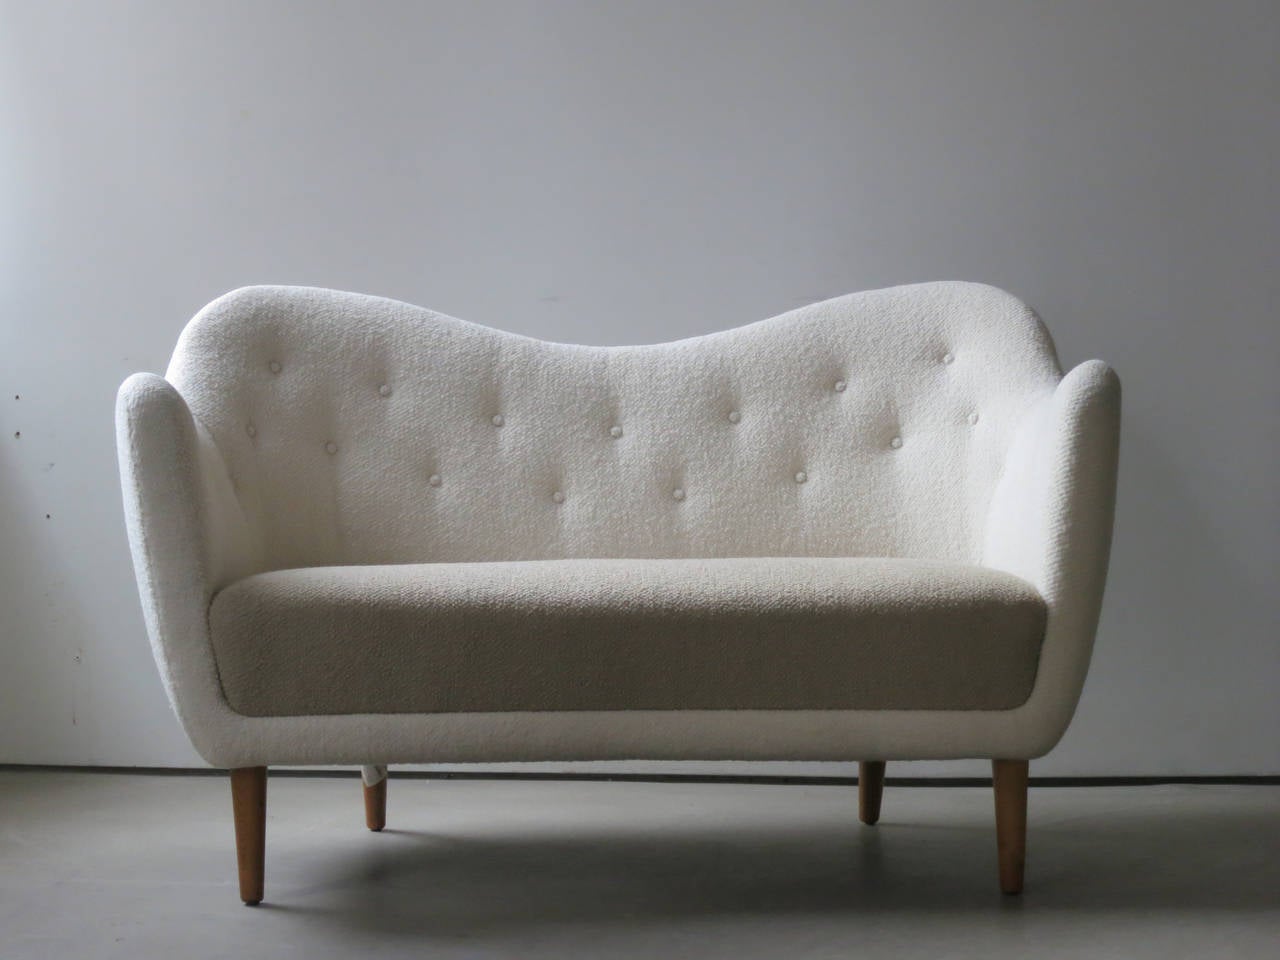 Elegant Curved Sofa with Teak Legs by Finn Juhl Designed in 1948. This iconic sofa, the 